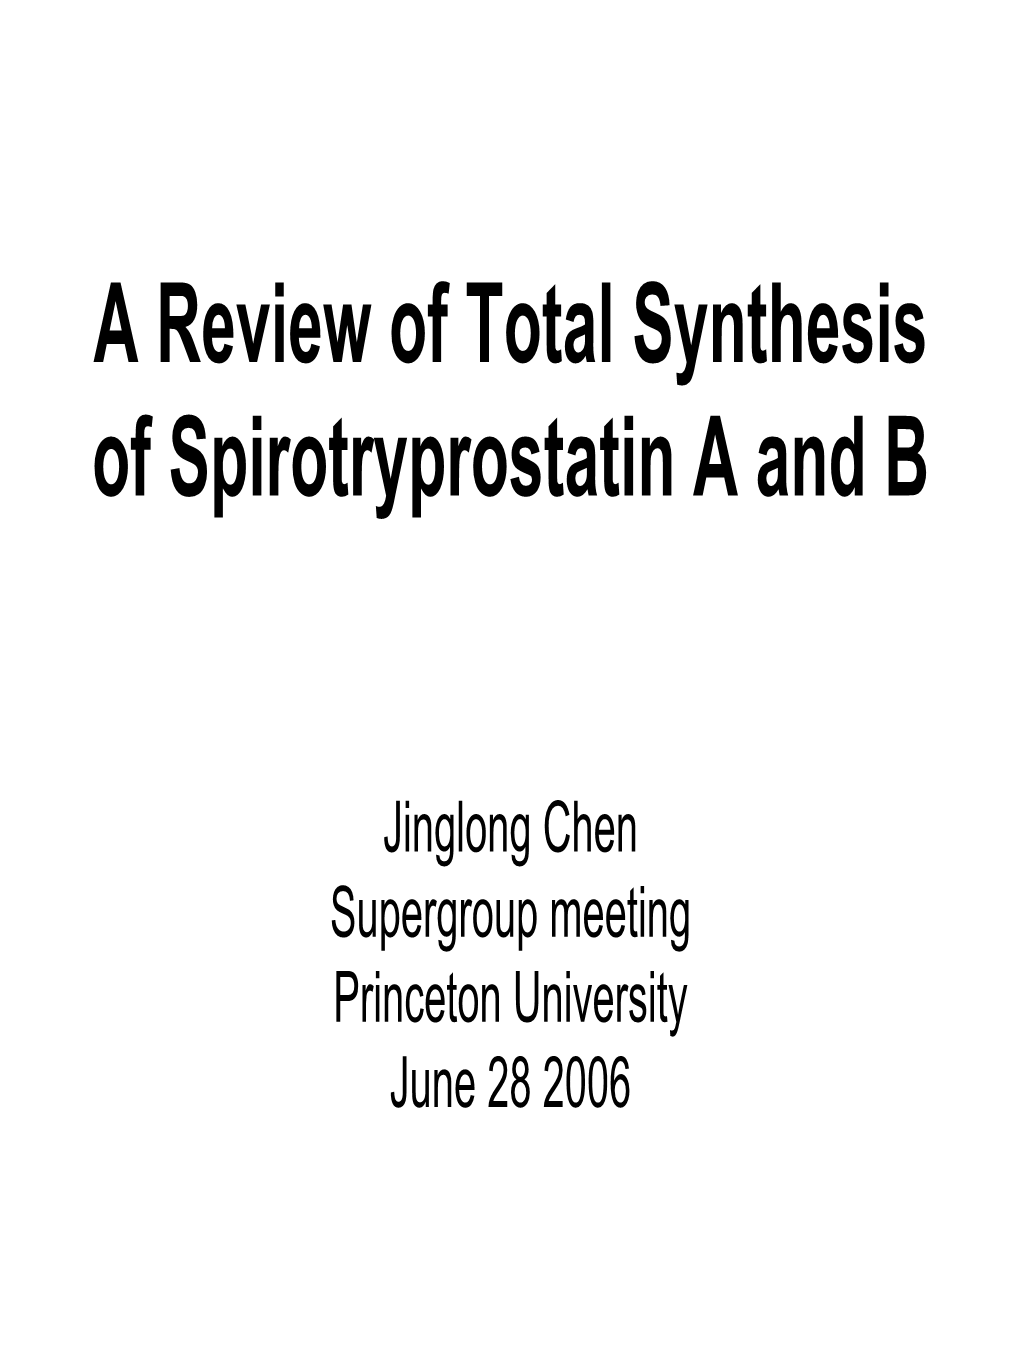 A Review of Total Synthesis of Spirotryprostatin B